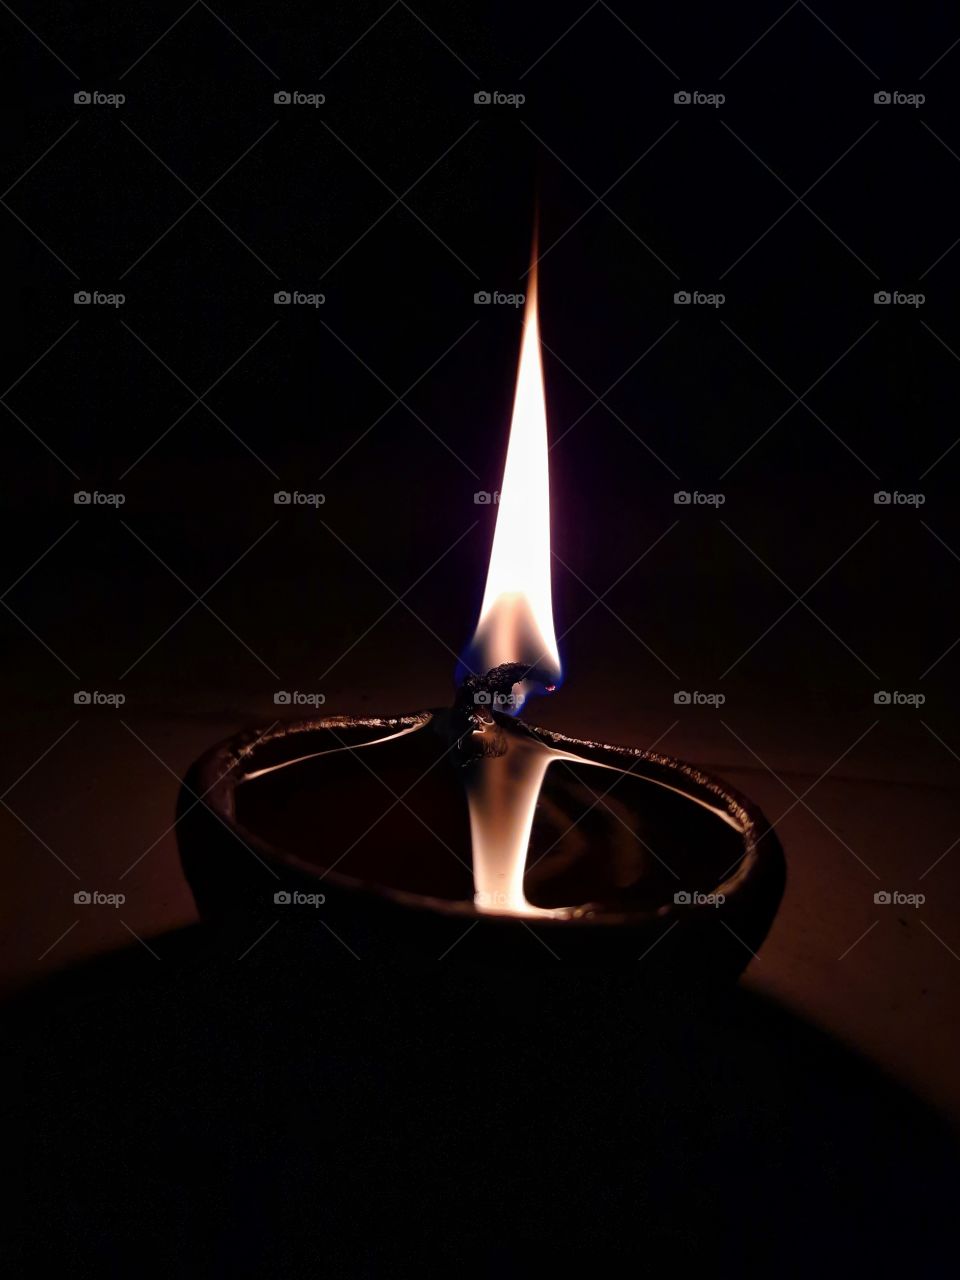 Burning bright and making the darkness go away. Clay oil lamp lighting the place amidst the darkness around.